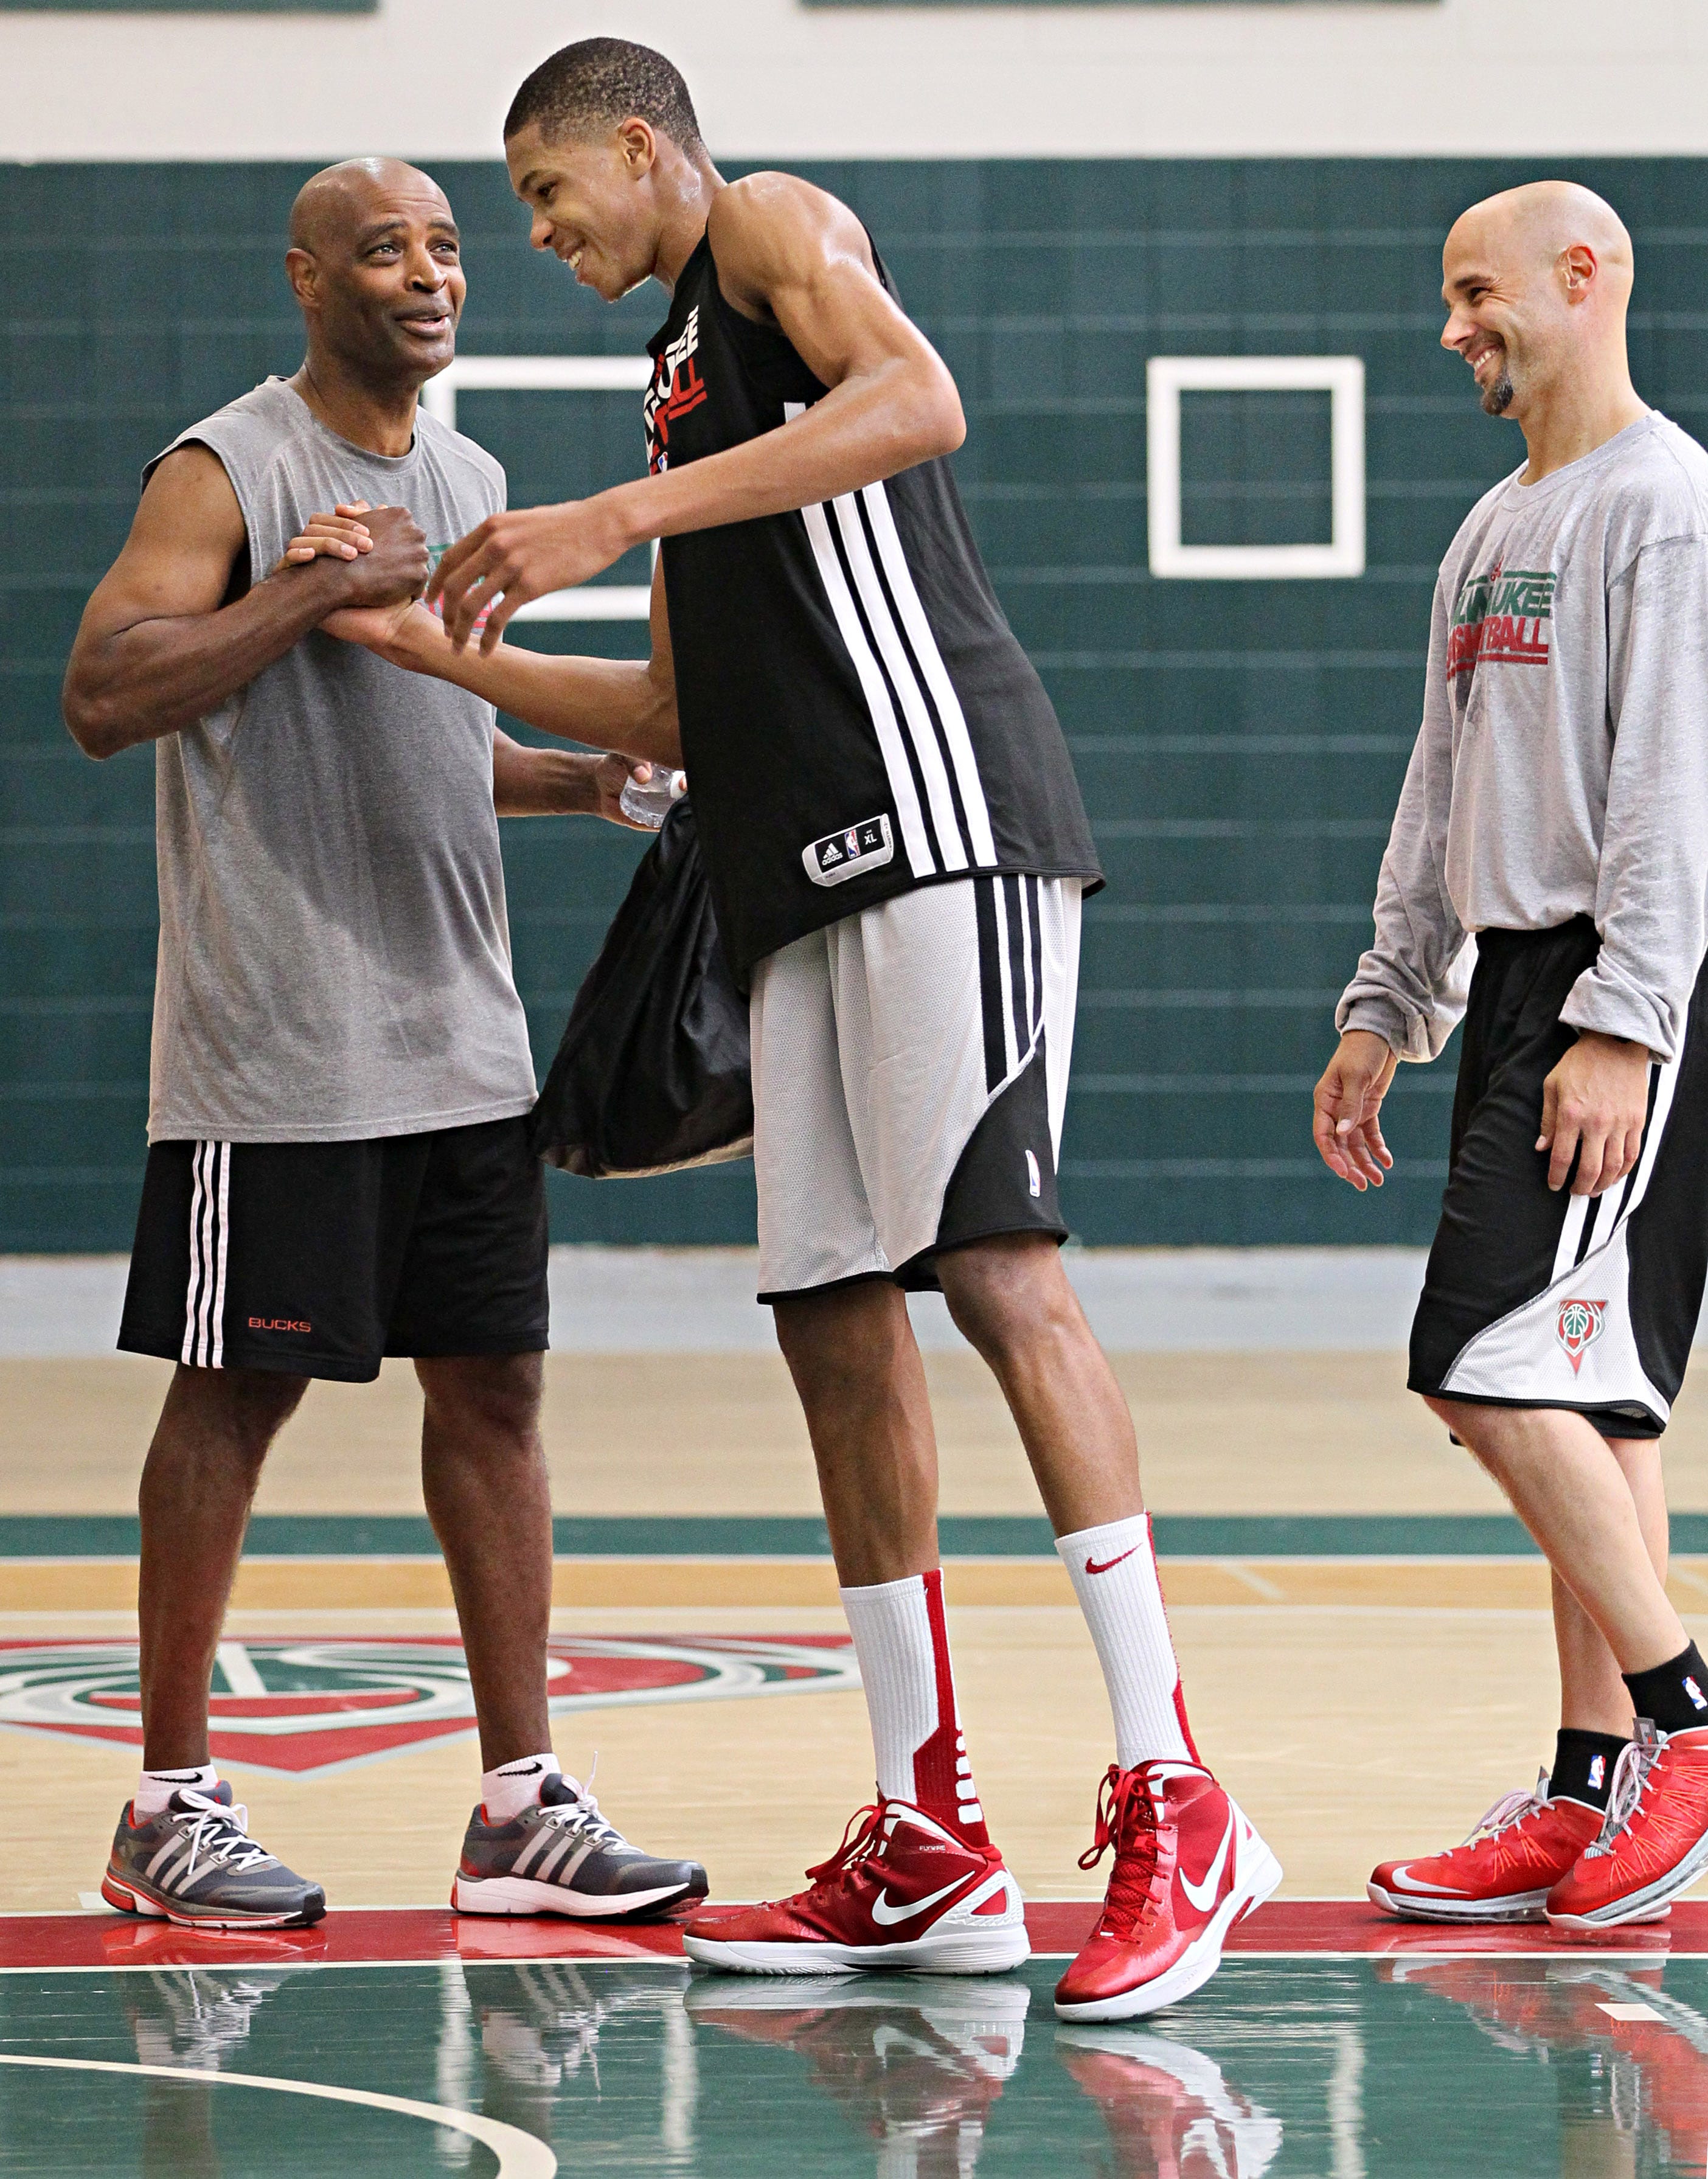 Rookie Giannis Antetokounmpo, the Bucks' first-round pick in 2013, shakes hands with coach Larry Drew as assistant Josh Oppenheimer looks on during Antetokounmpo's first training camp.